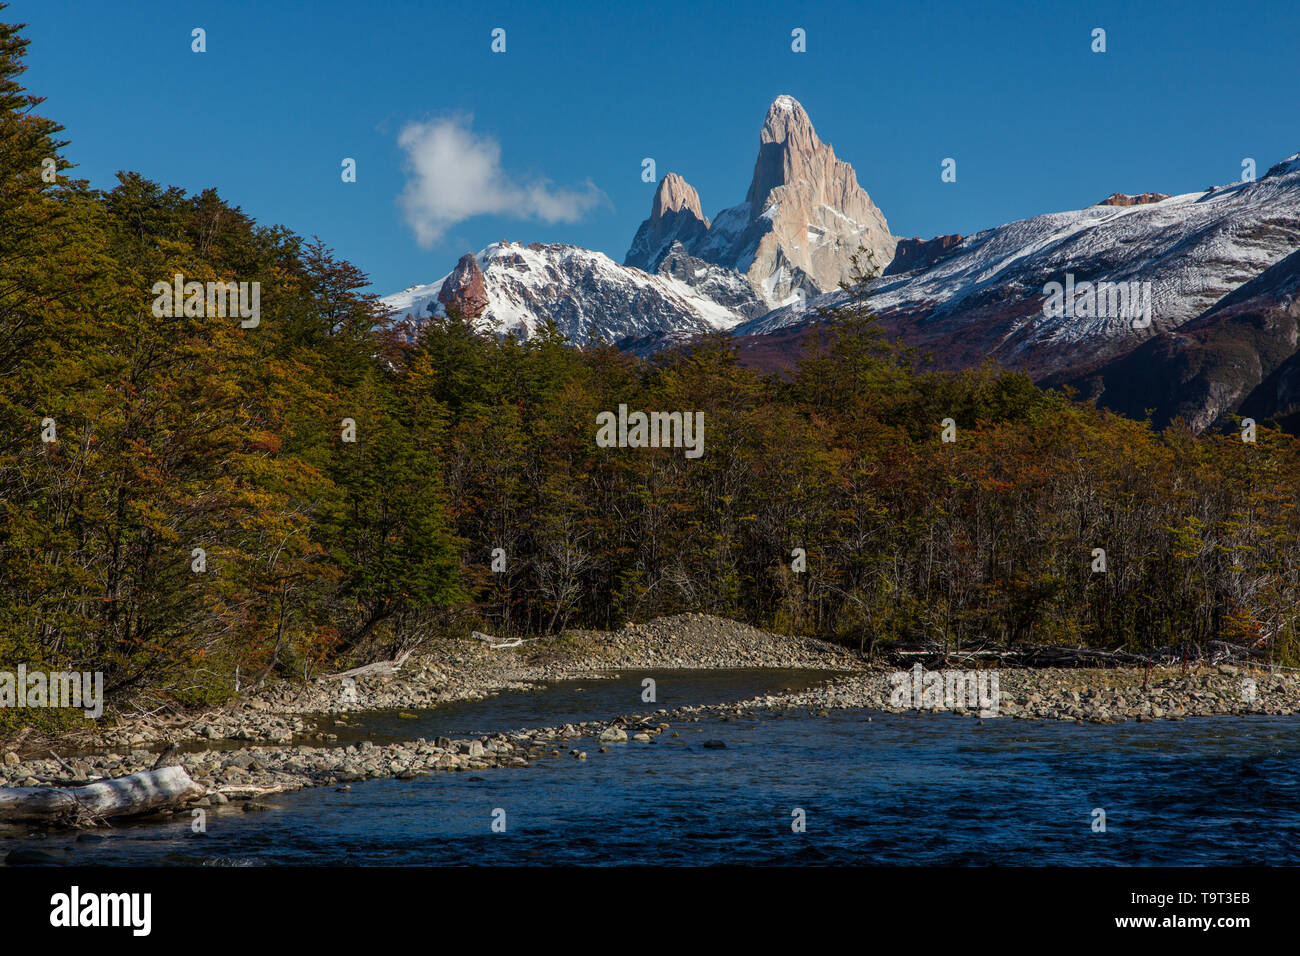 Mount Fitz Roy and Cerro Poincenot in Los Glaciares National Park, as seen from north of El Chalten, Argentina, in the Patagonia region of South Ameri Stock Photo